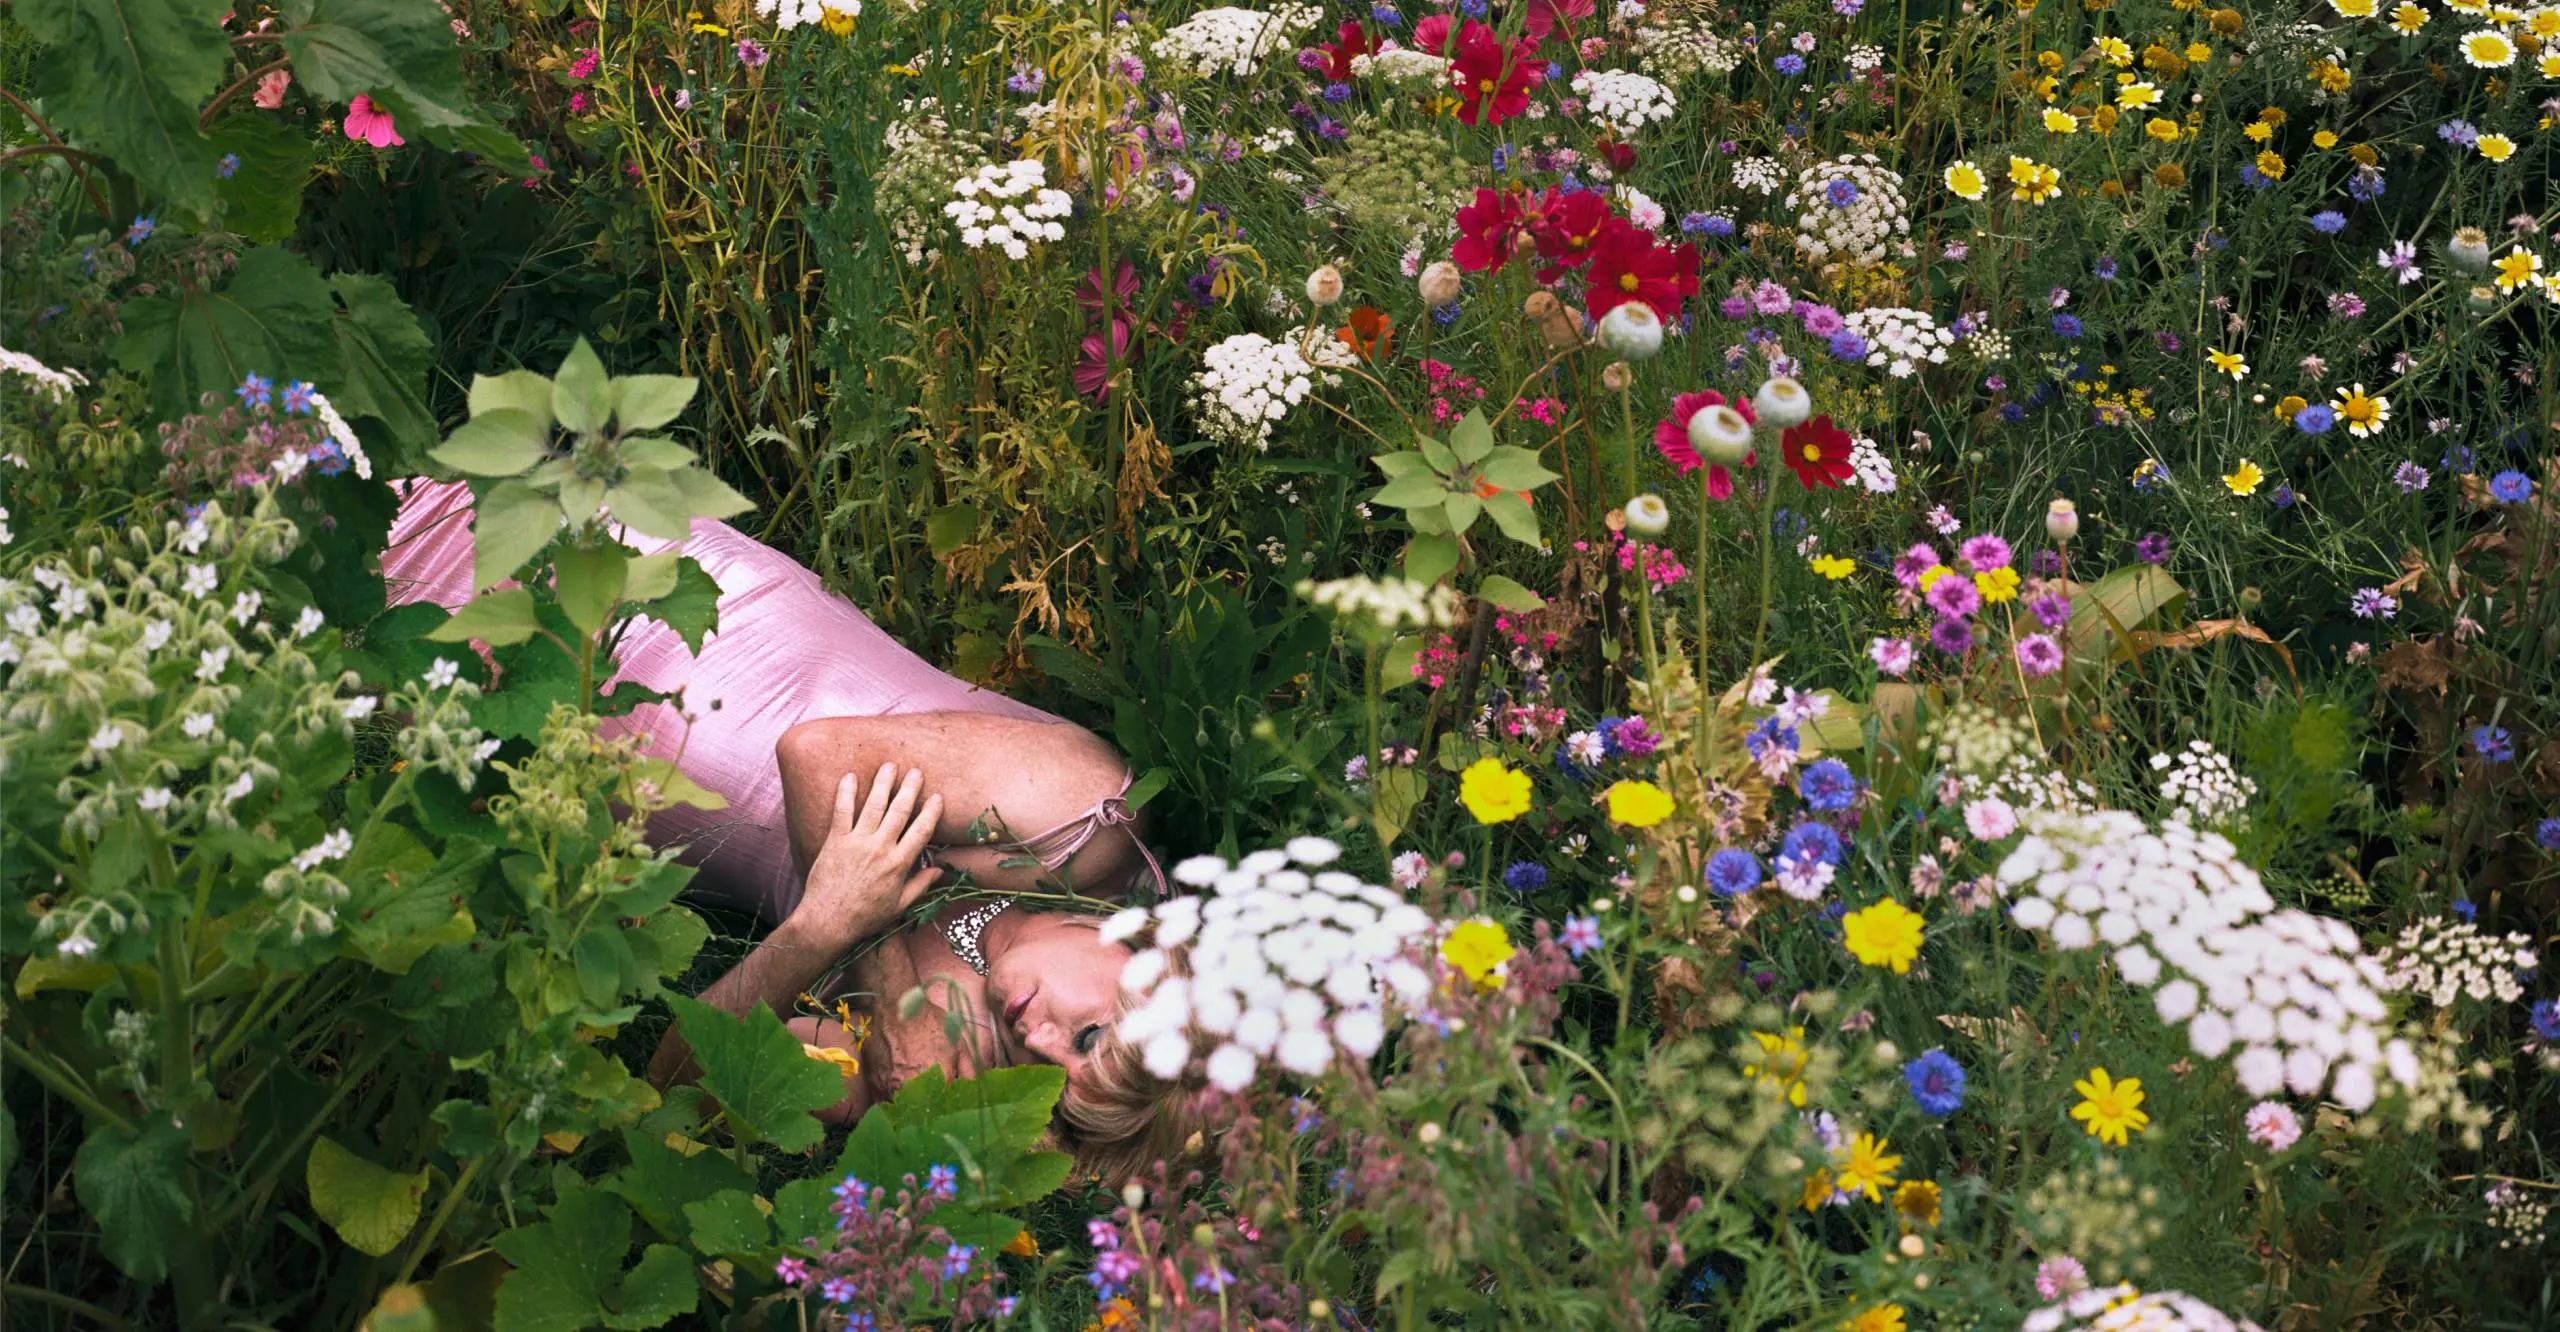 Colour photograph of a person laying in the grass of a garden, surrounded by wild flowers